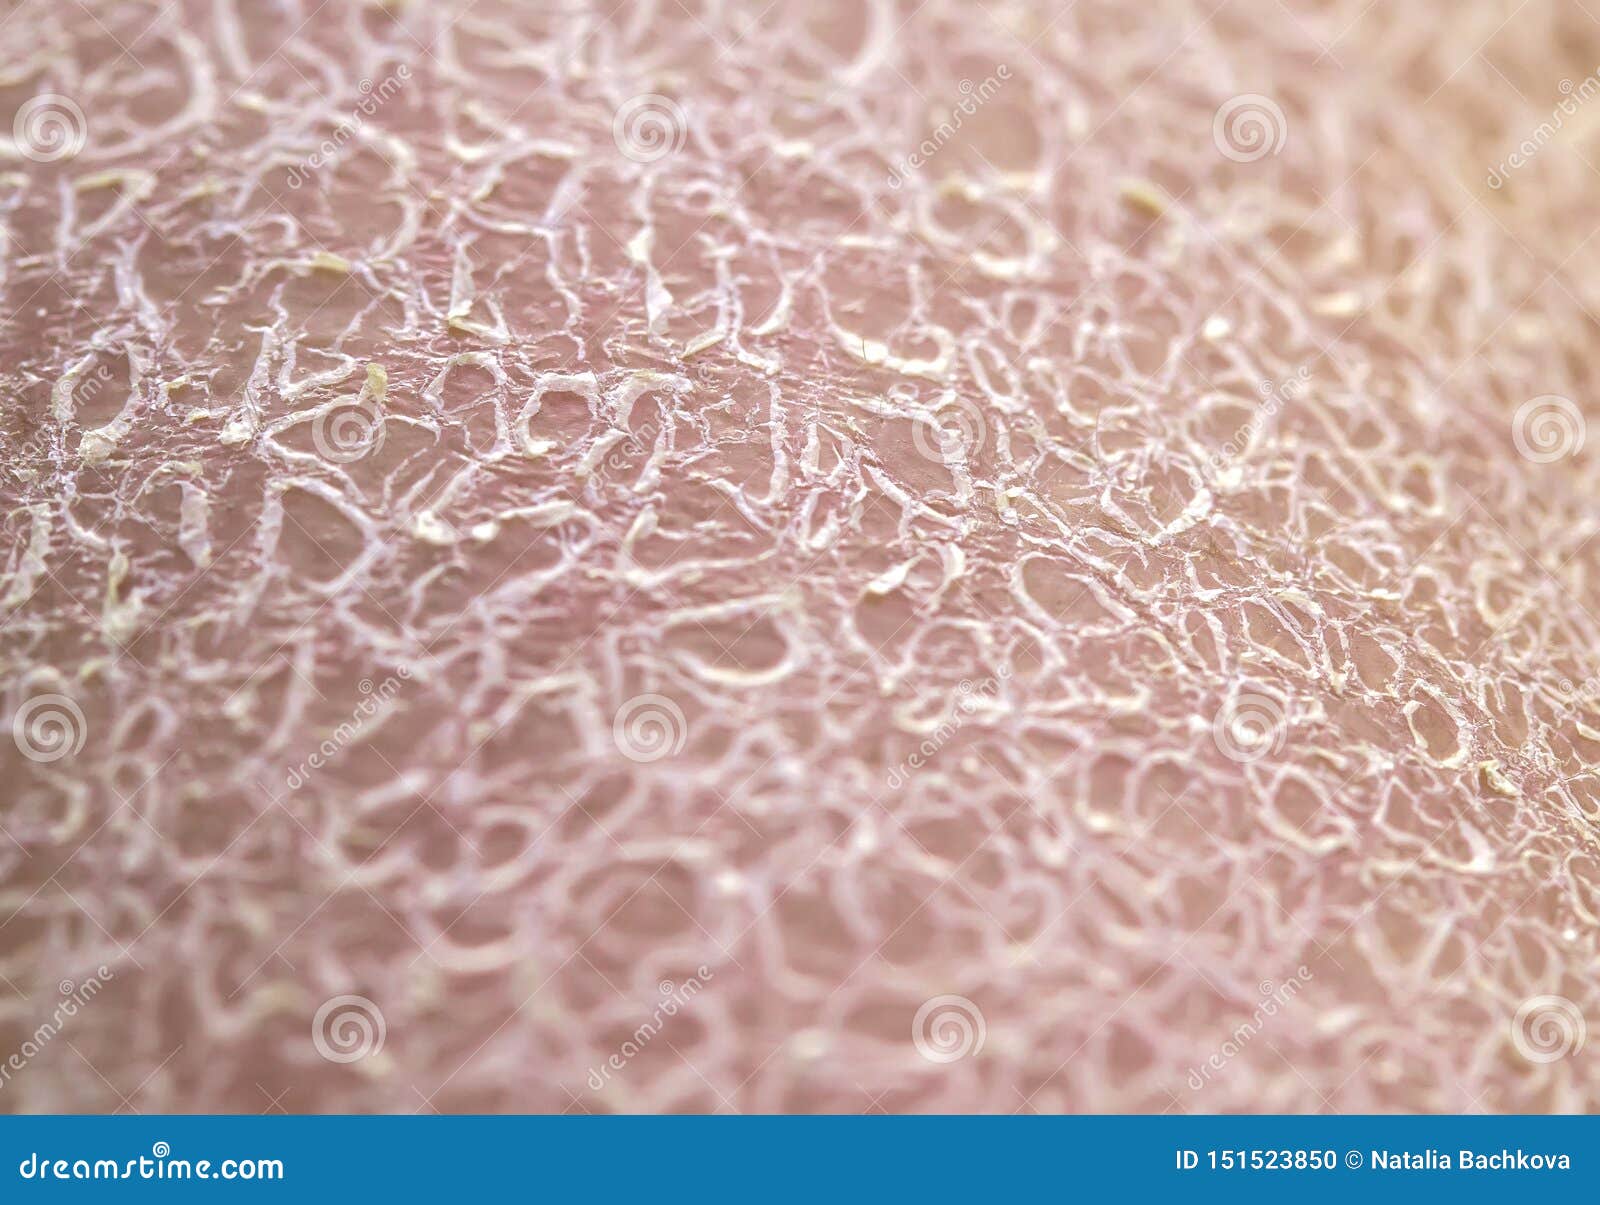 Background of Dry Unhealthy Skin Texture Close-up Covered with Small and Large Cracks and Dead Flaky Scales Sun Stock Photo - Image of female, 151523850